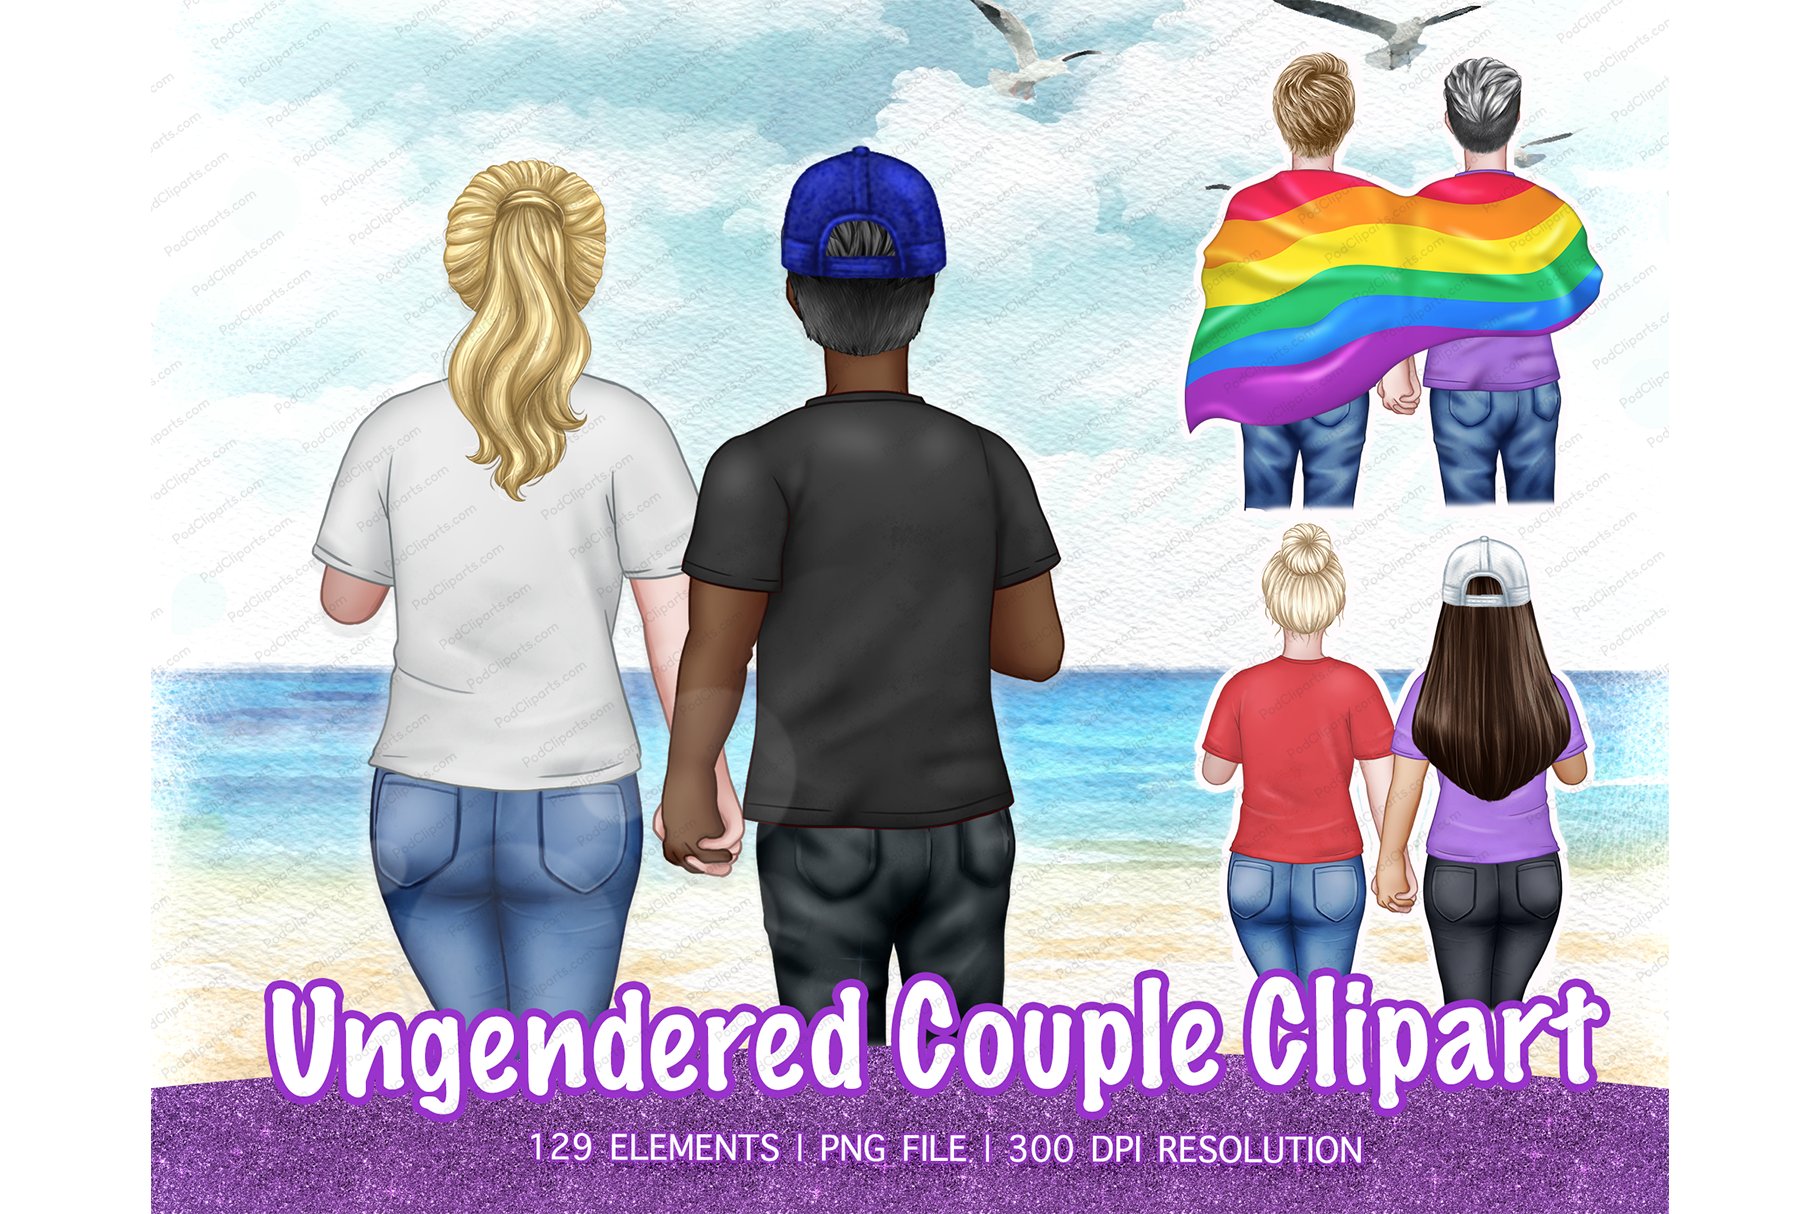 LGBTQ Ungendered, Gay Clipart PNG cover image.